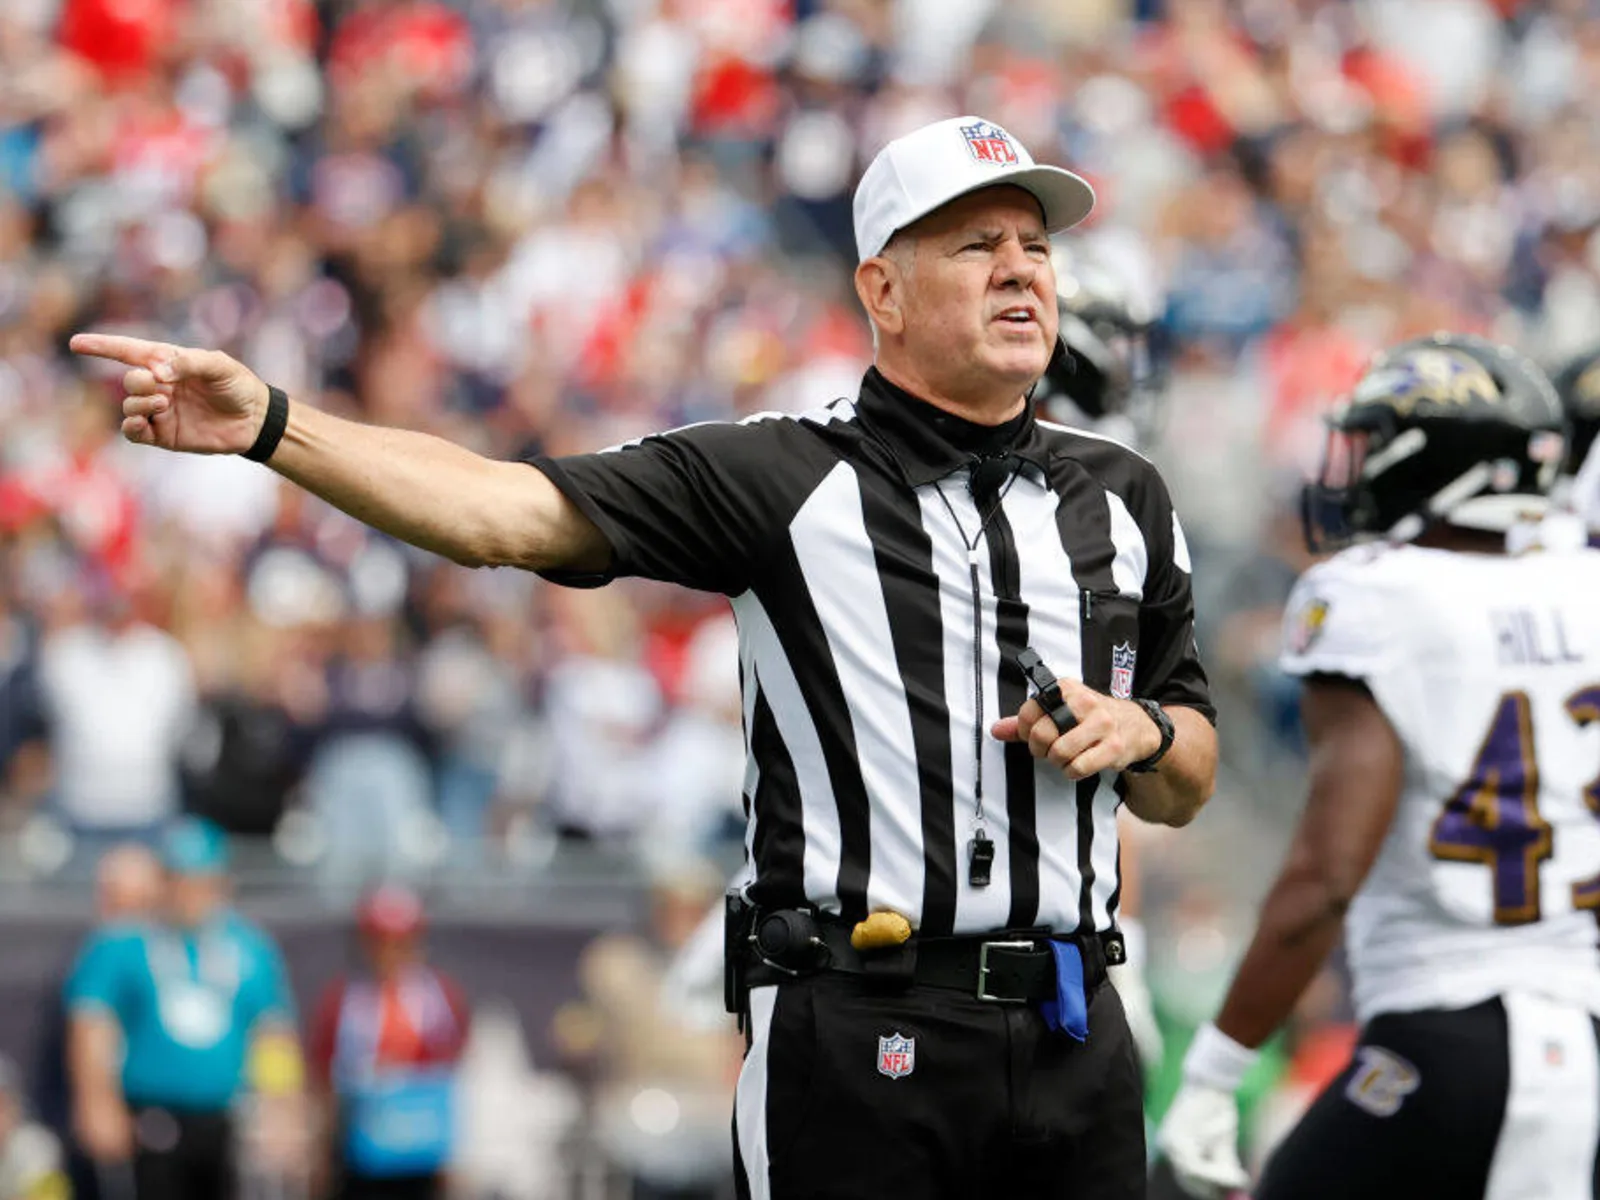 The NFL selects Bill Vinovich as lead referee for Super Bowl